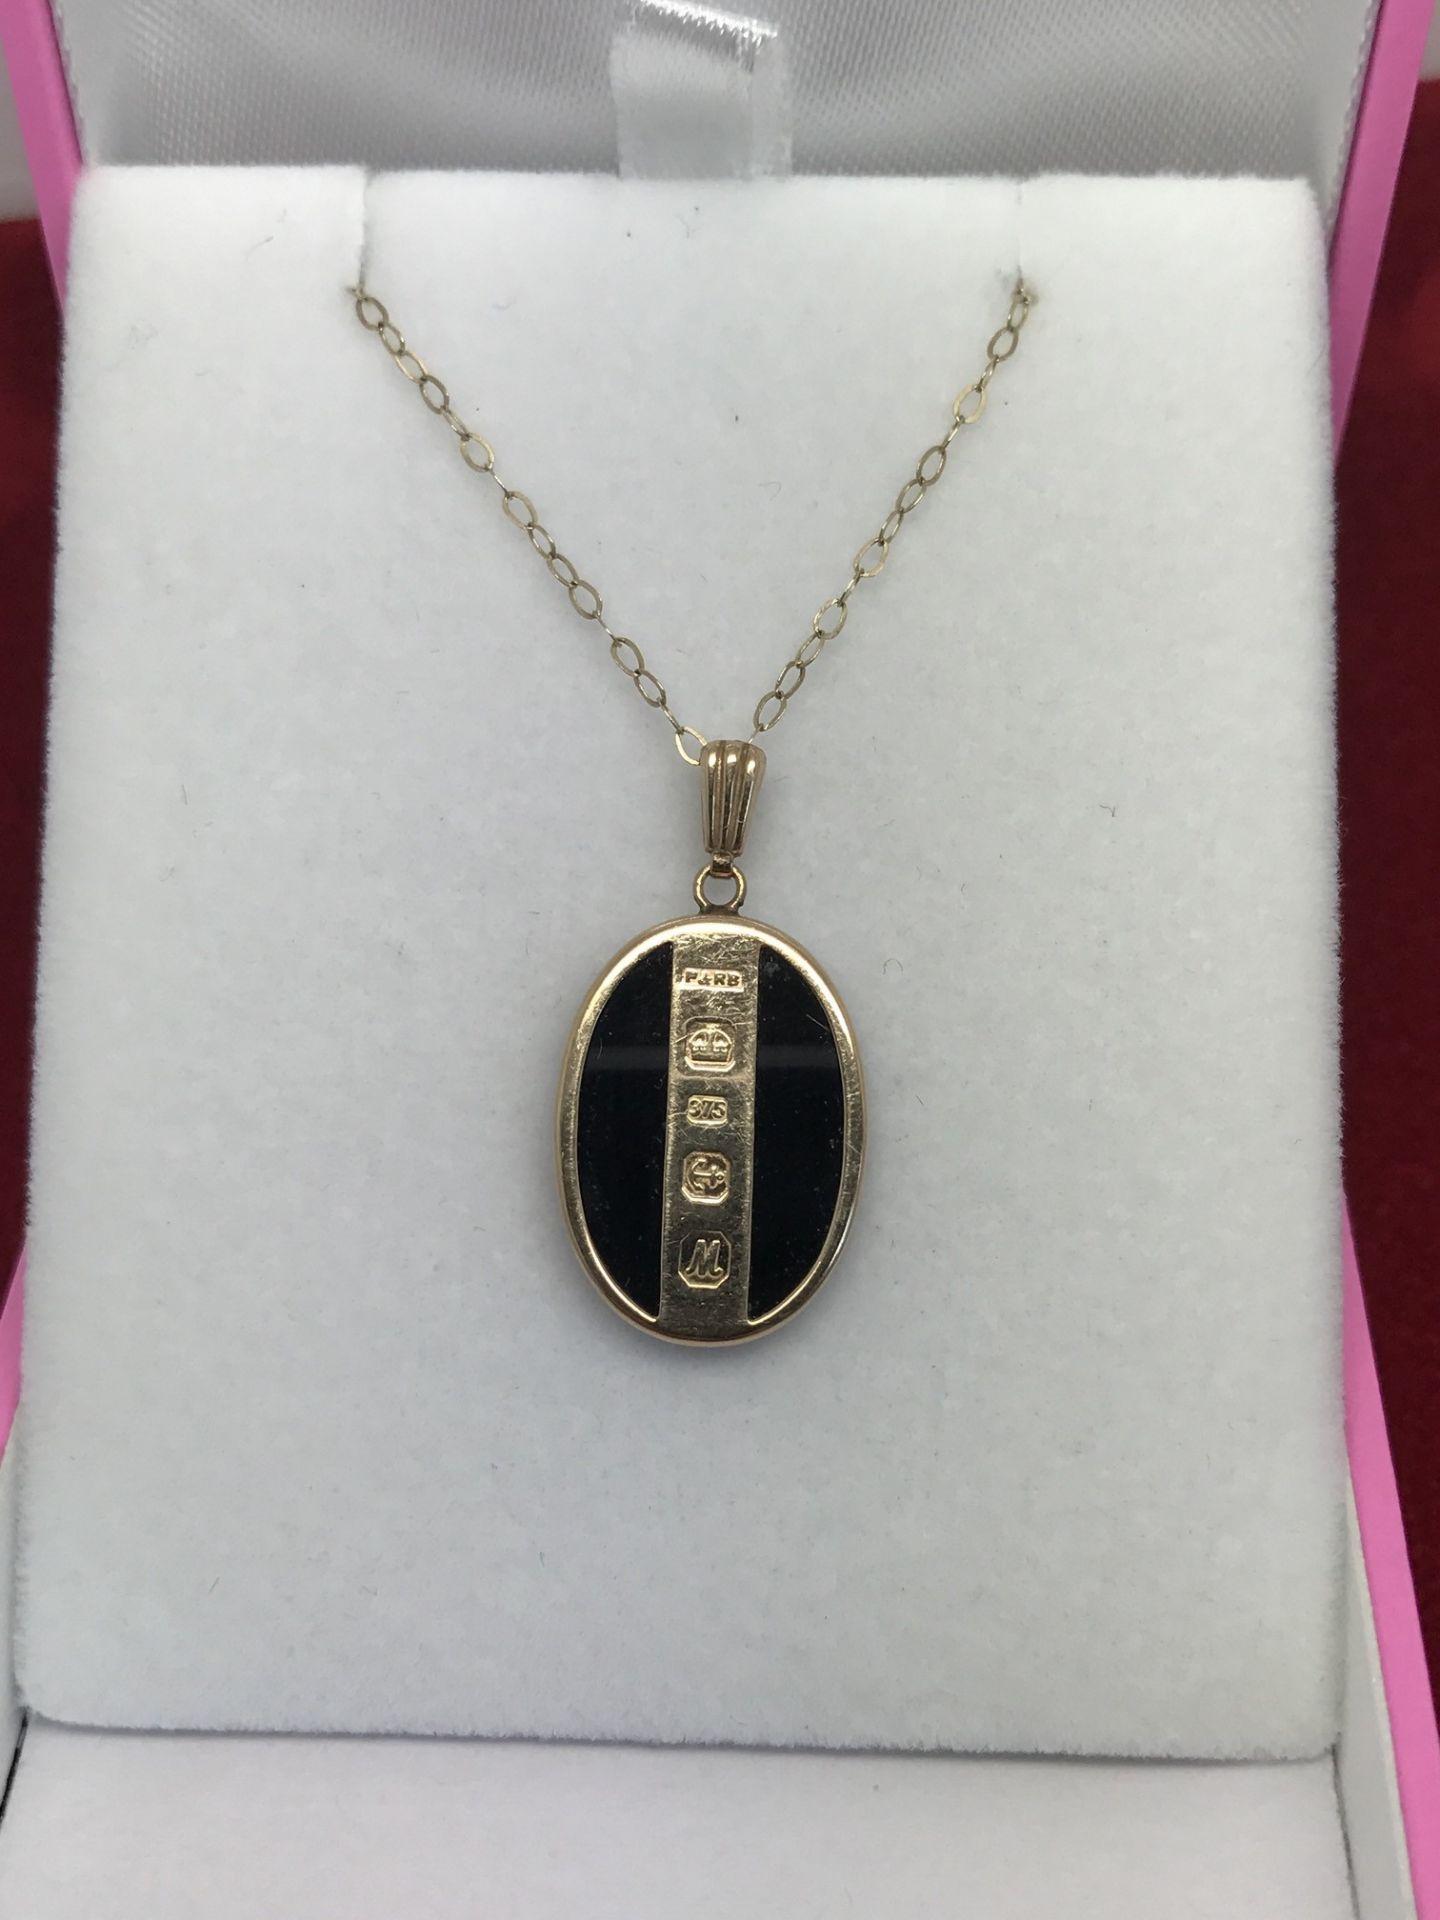 9ct Gold Onyx Pendant - Comes with 9ct Gold 16"Chain - Image 2 of 2